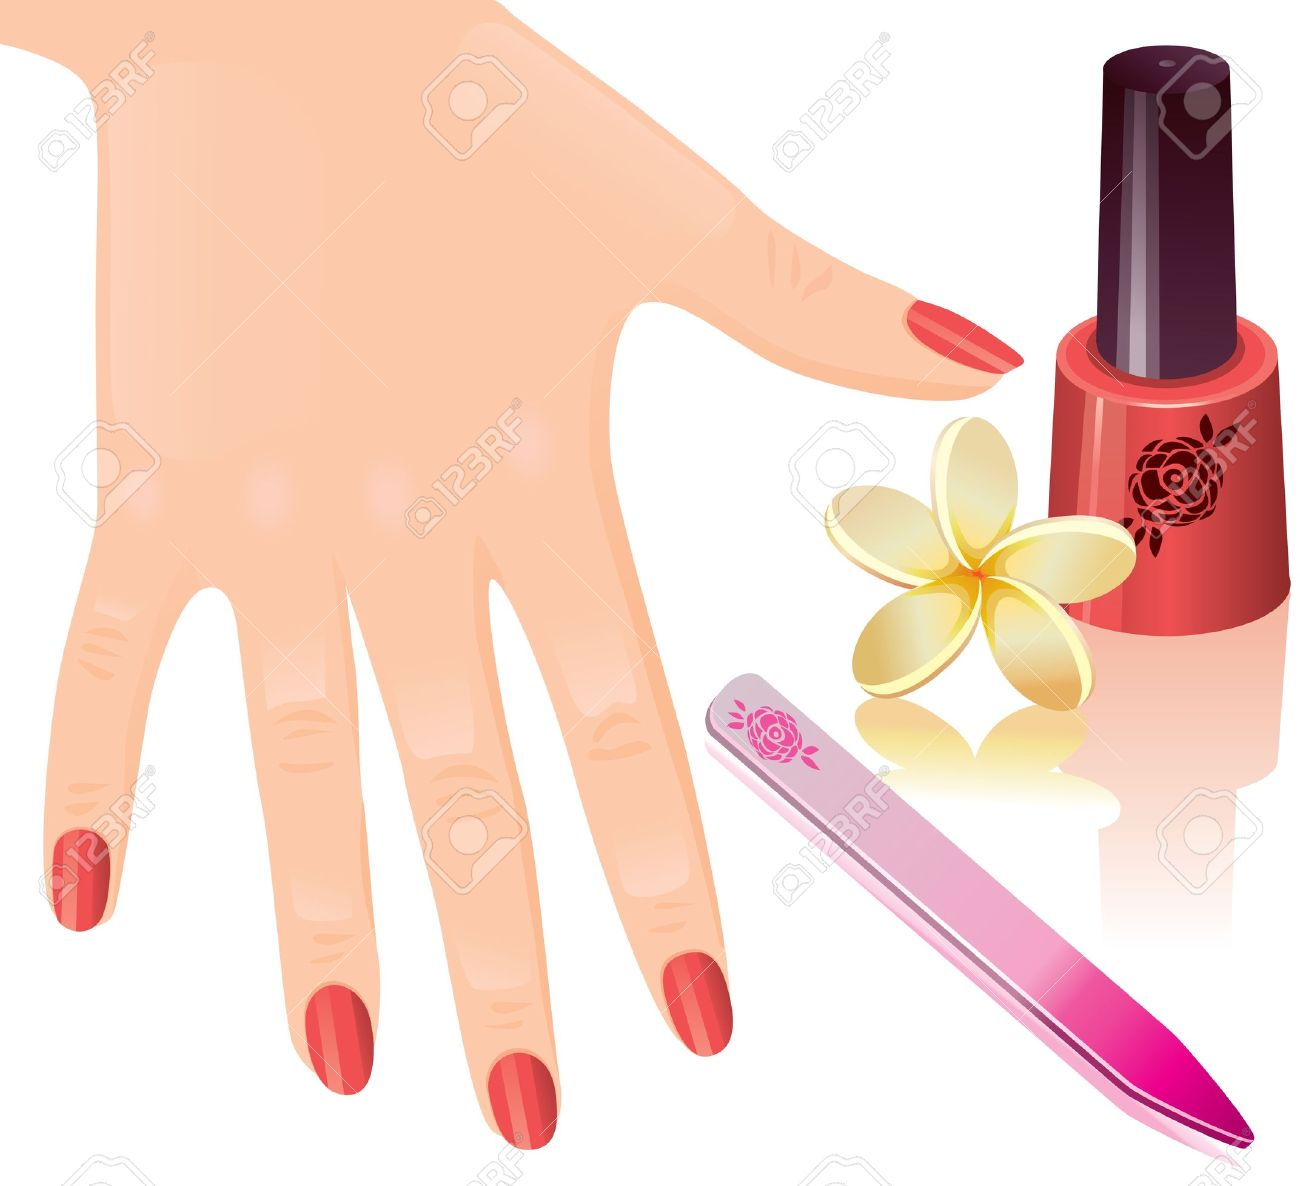 clipart of nails - photo #18